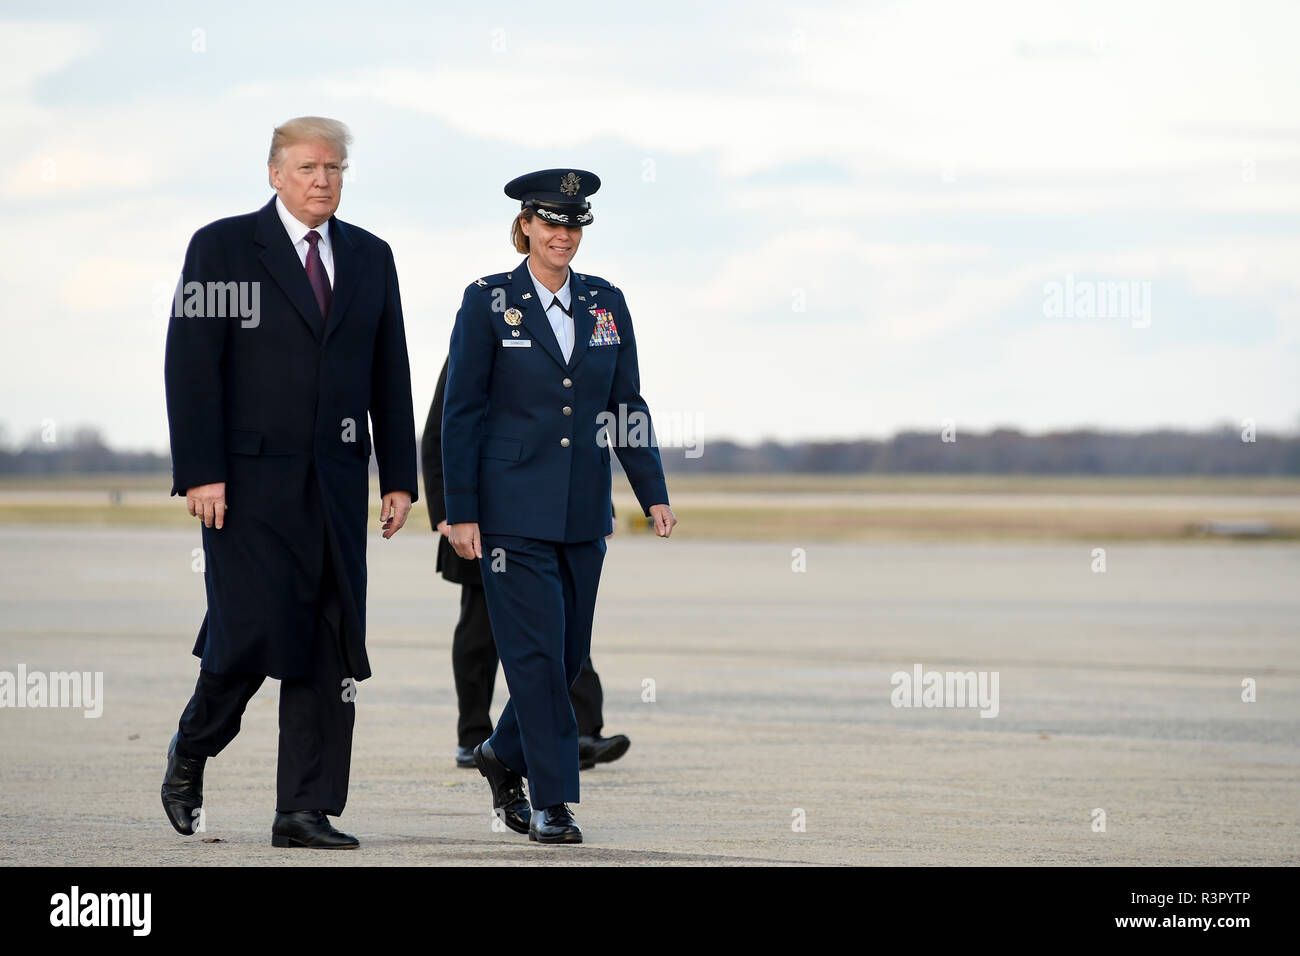 President of the United States Donald Trump is escorted to Air Force One by Col. Rebecca Sonkiss, 89th Airlift Wing commander, Nov. 20, 2018 Joint Base Andrews, Md. (U.S. Air Force photo/Staff Sgt. Kenny Holston) Stock Photo